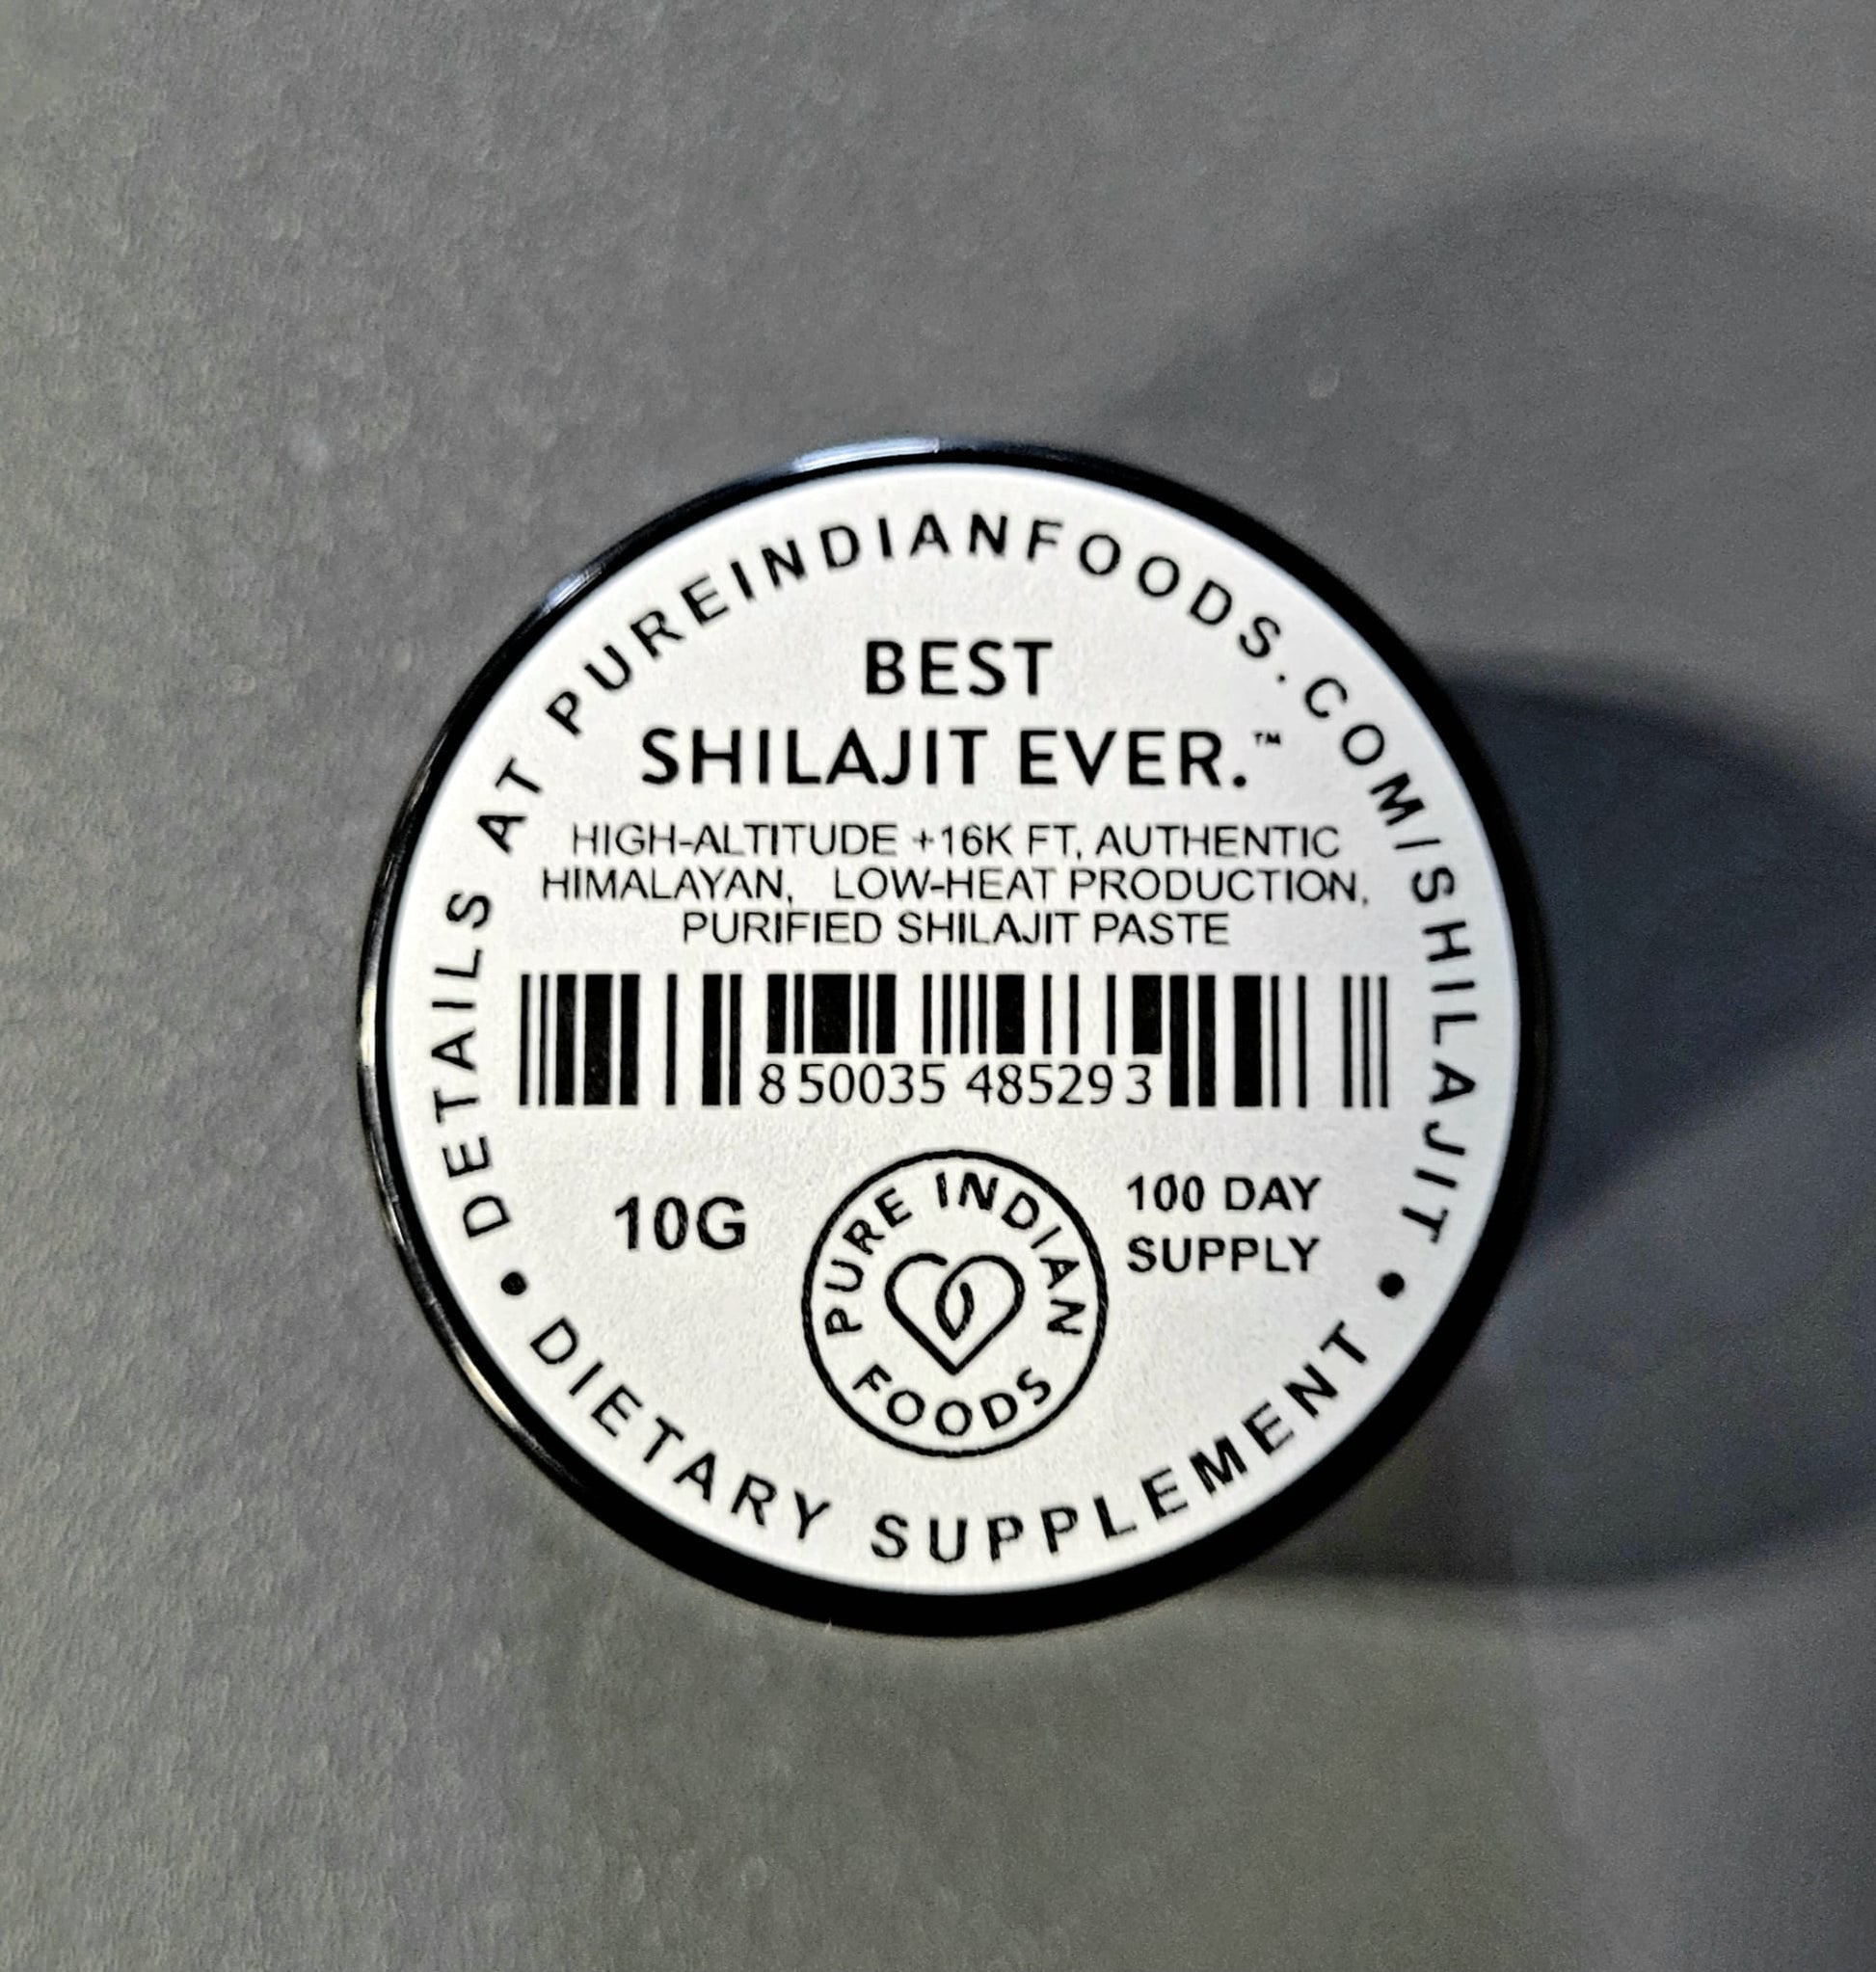 Label of a jar of Pure Indian Foods Best Shilajit Ever. It says it's high-altitude over 16kft, authentic Himalyan shilajit resin, low-heat production, purified shilajit paste, in a 100 day supply